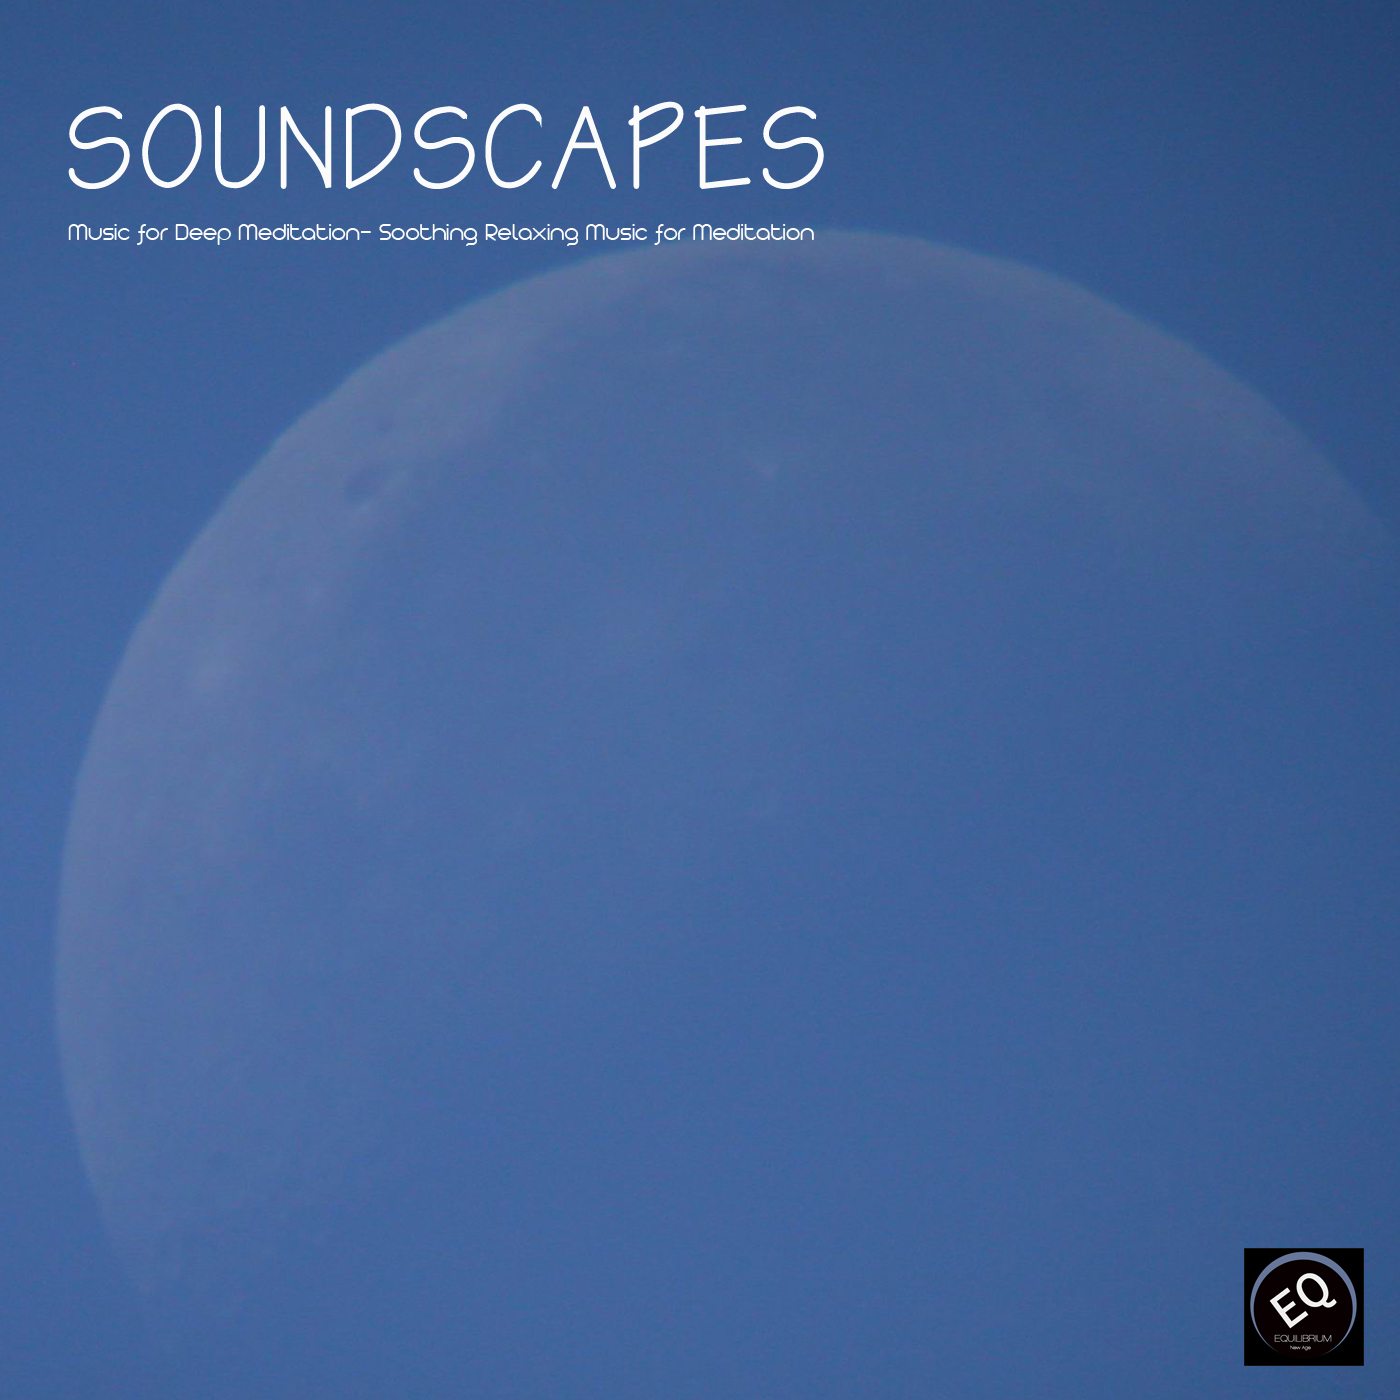 Soundscapes - Music for Deep Meditation. Soothing Relaxing Music with Nature Sounds for Relaxation and Meditation